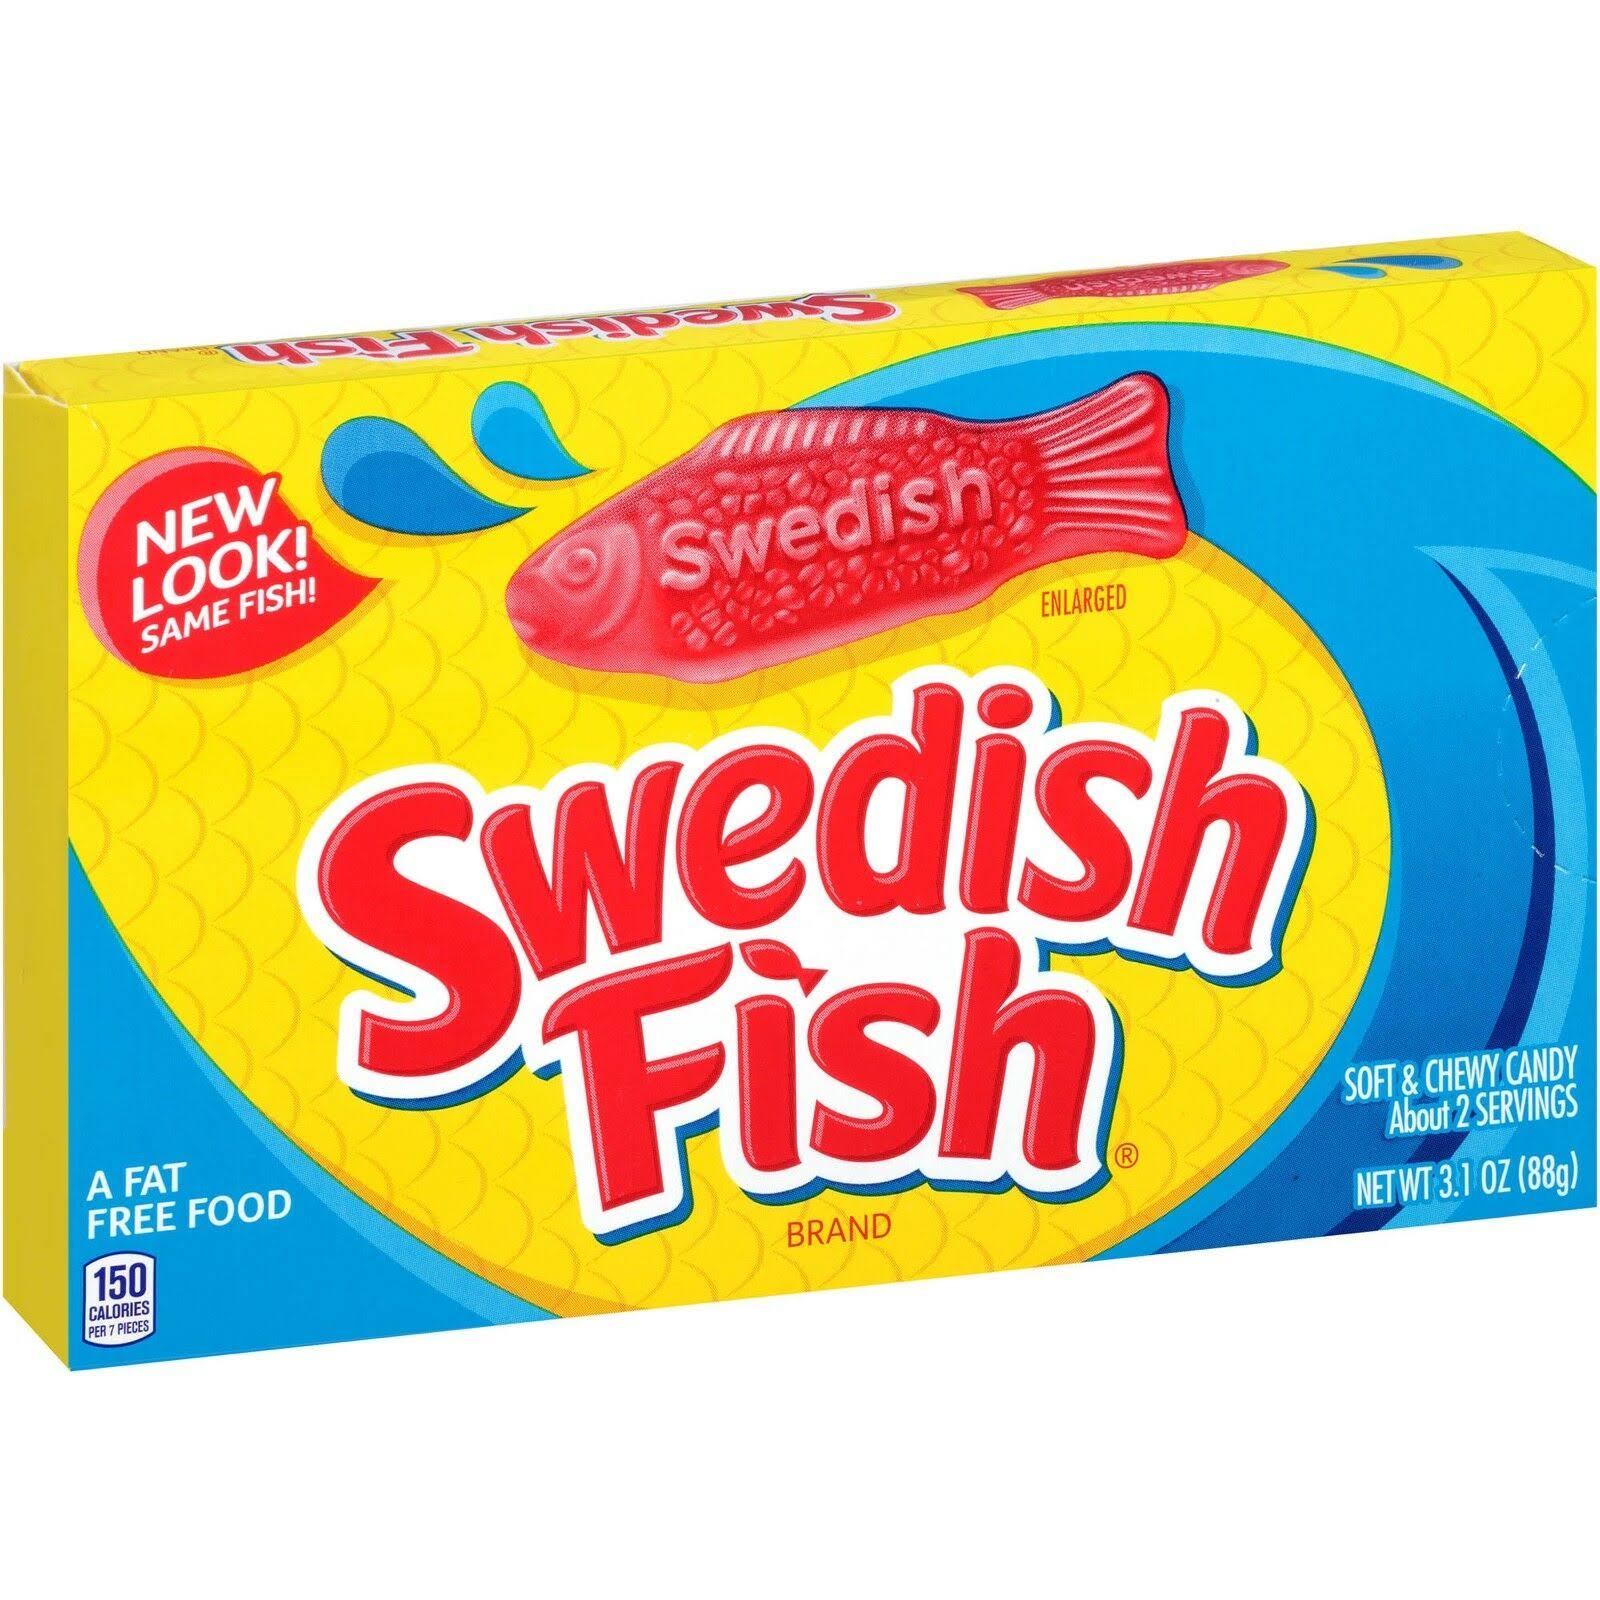 Swedish Fish Soft and Chewy Candy - 87g